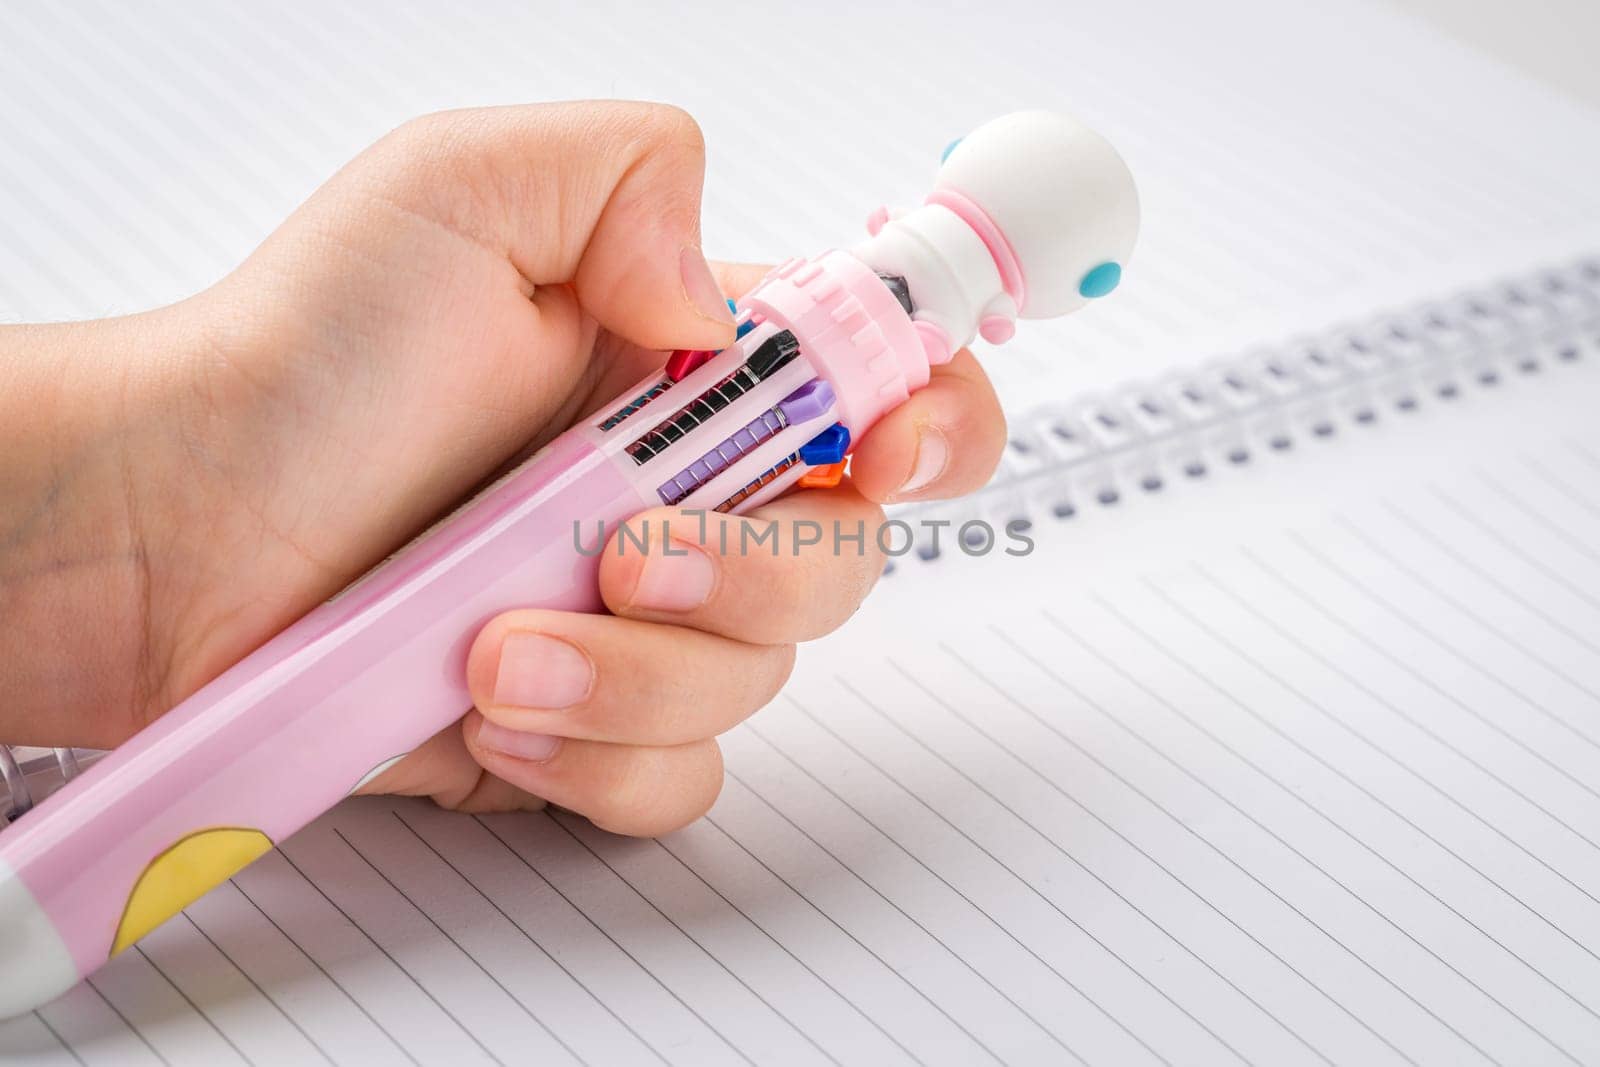 Little girl chooses color from a pen that can write in different colors by Sonat